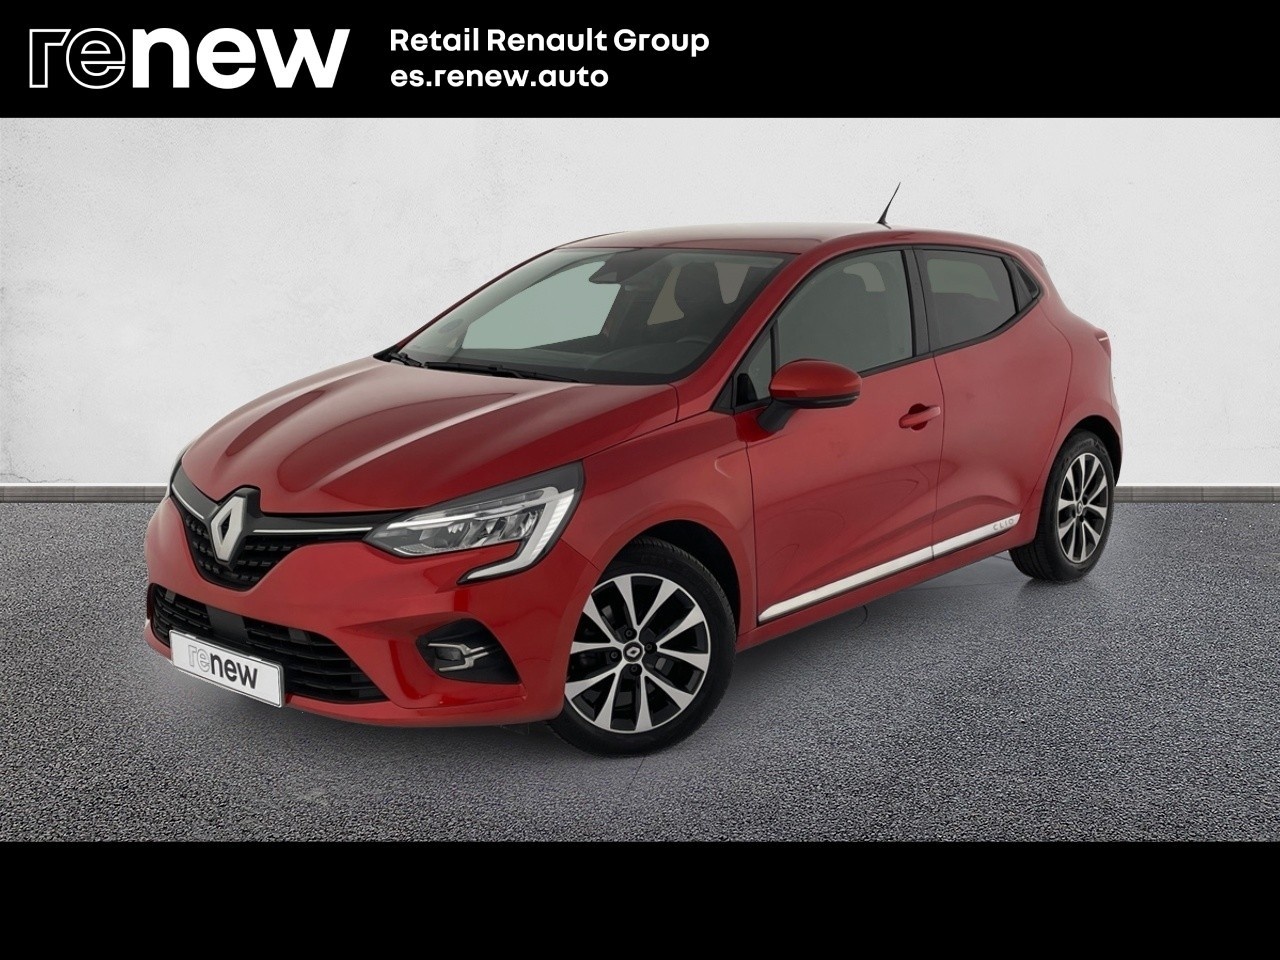 Renault Clio Intens TCe 74 kW (100 CV) GLP - 1